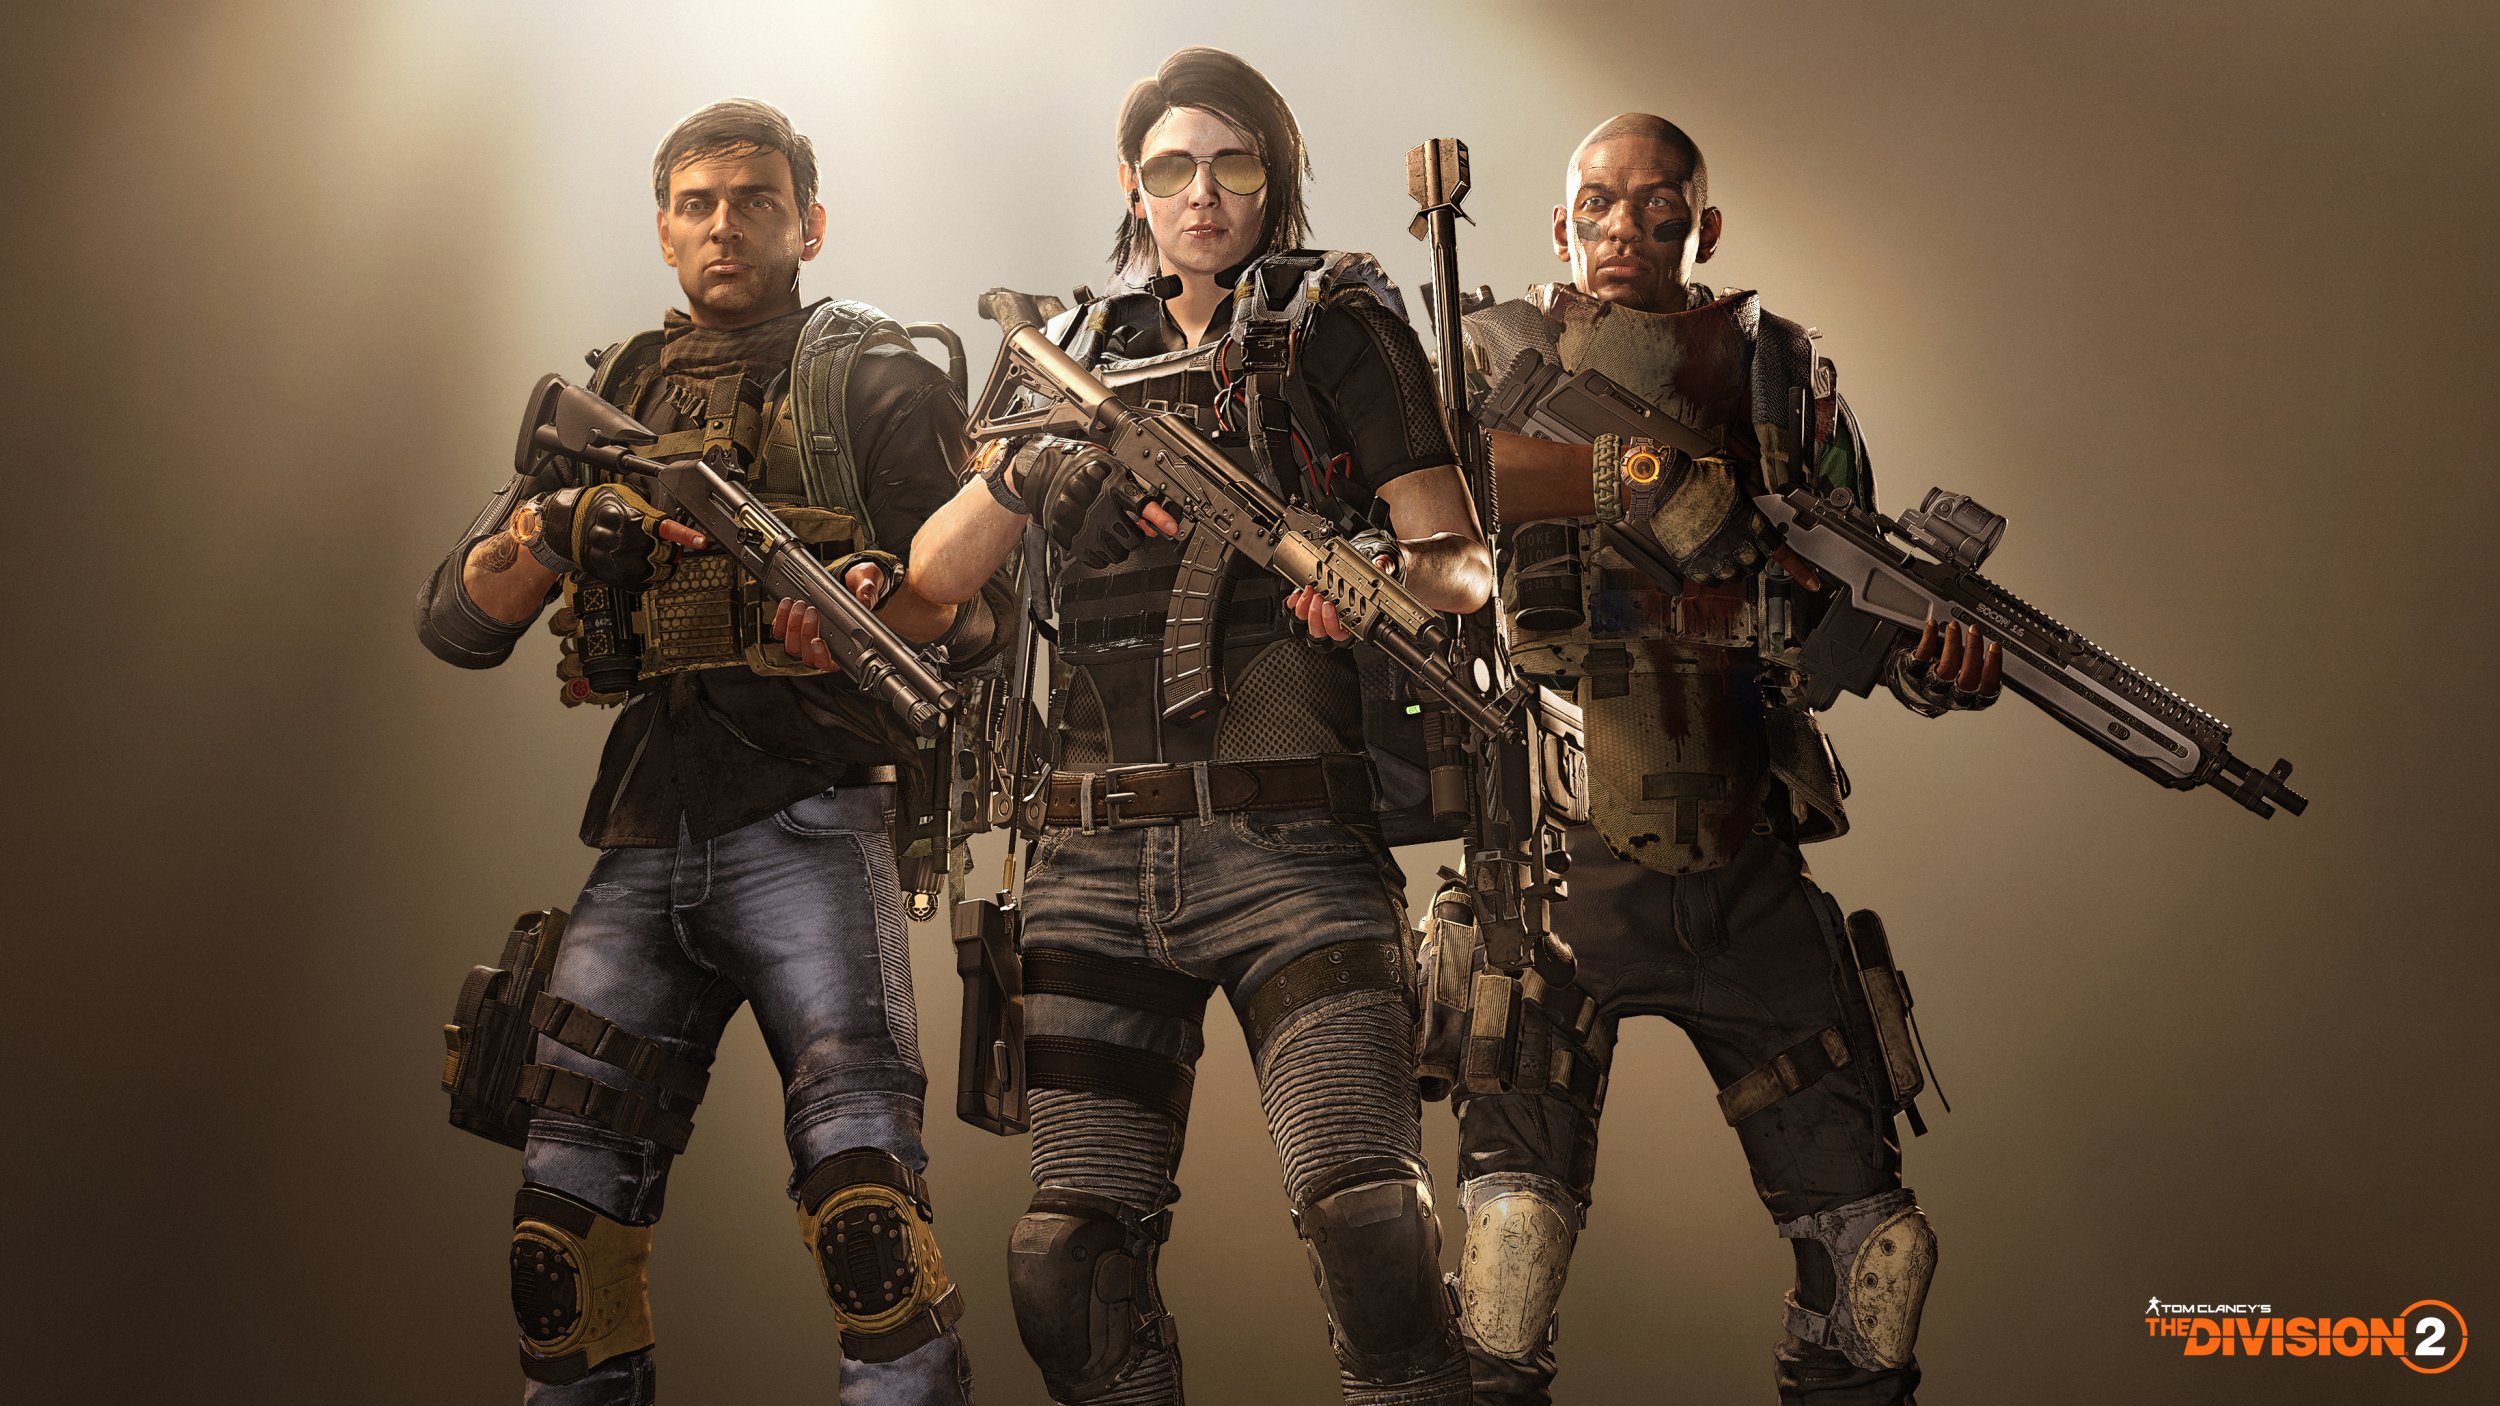 The Division 2 update